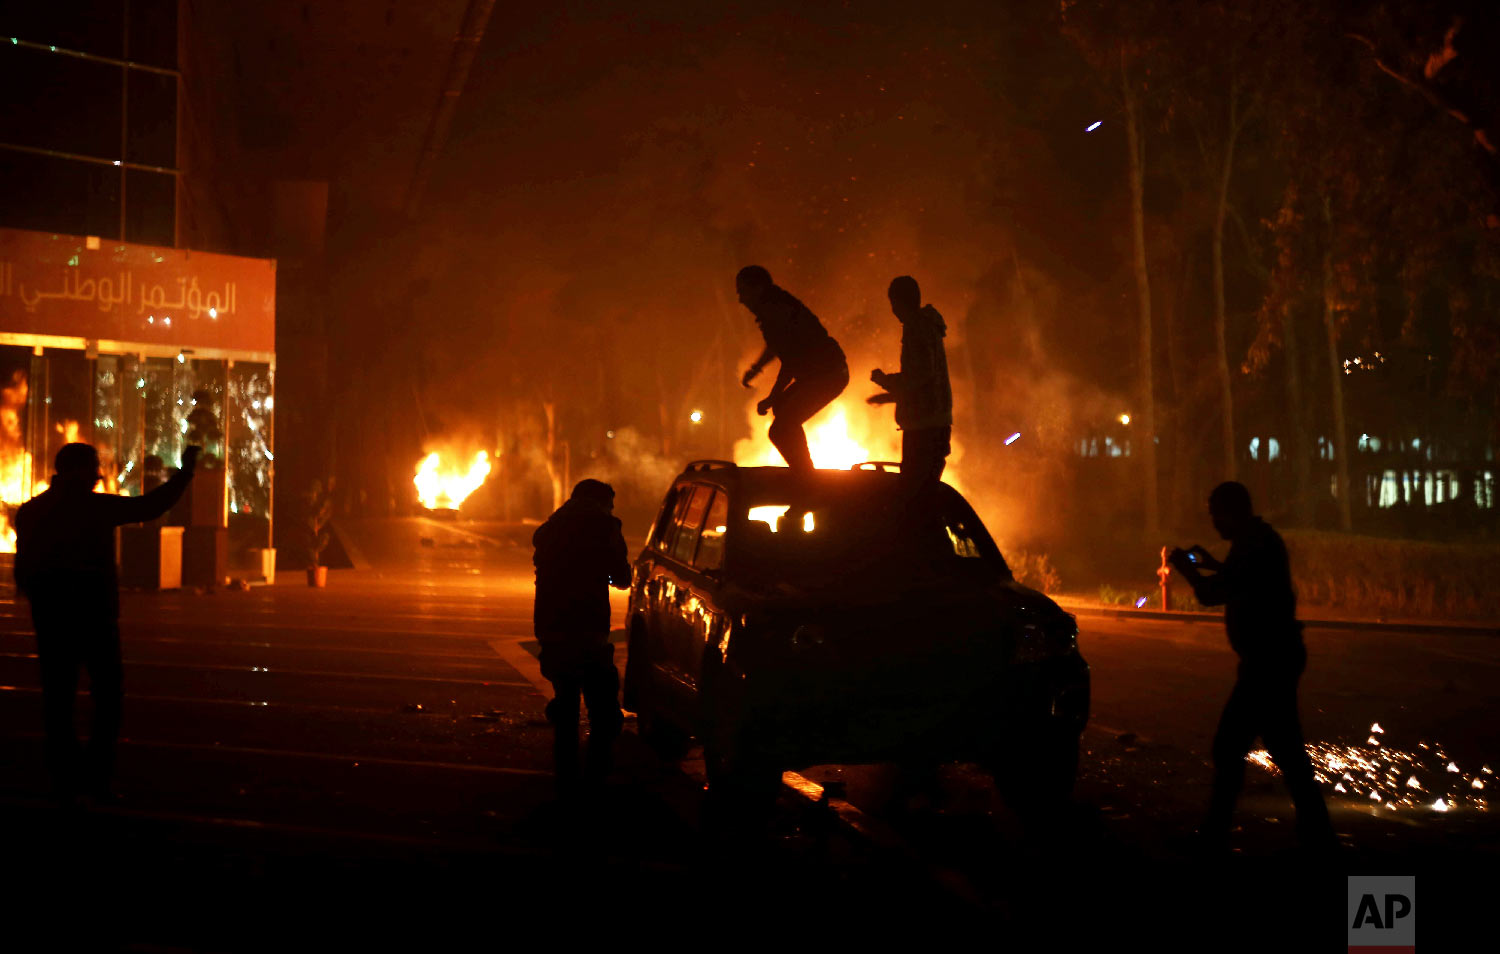  Protesters stand atop a vehicle as others burn in front of the National Conference Hall, in Tripoli, Libya, March 2, 2014.  (AP Photo/Mohamed Ben Khalifa) 